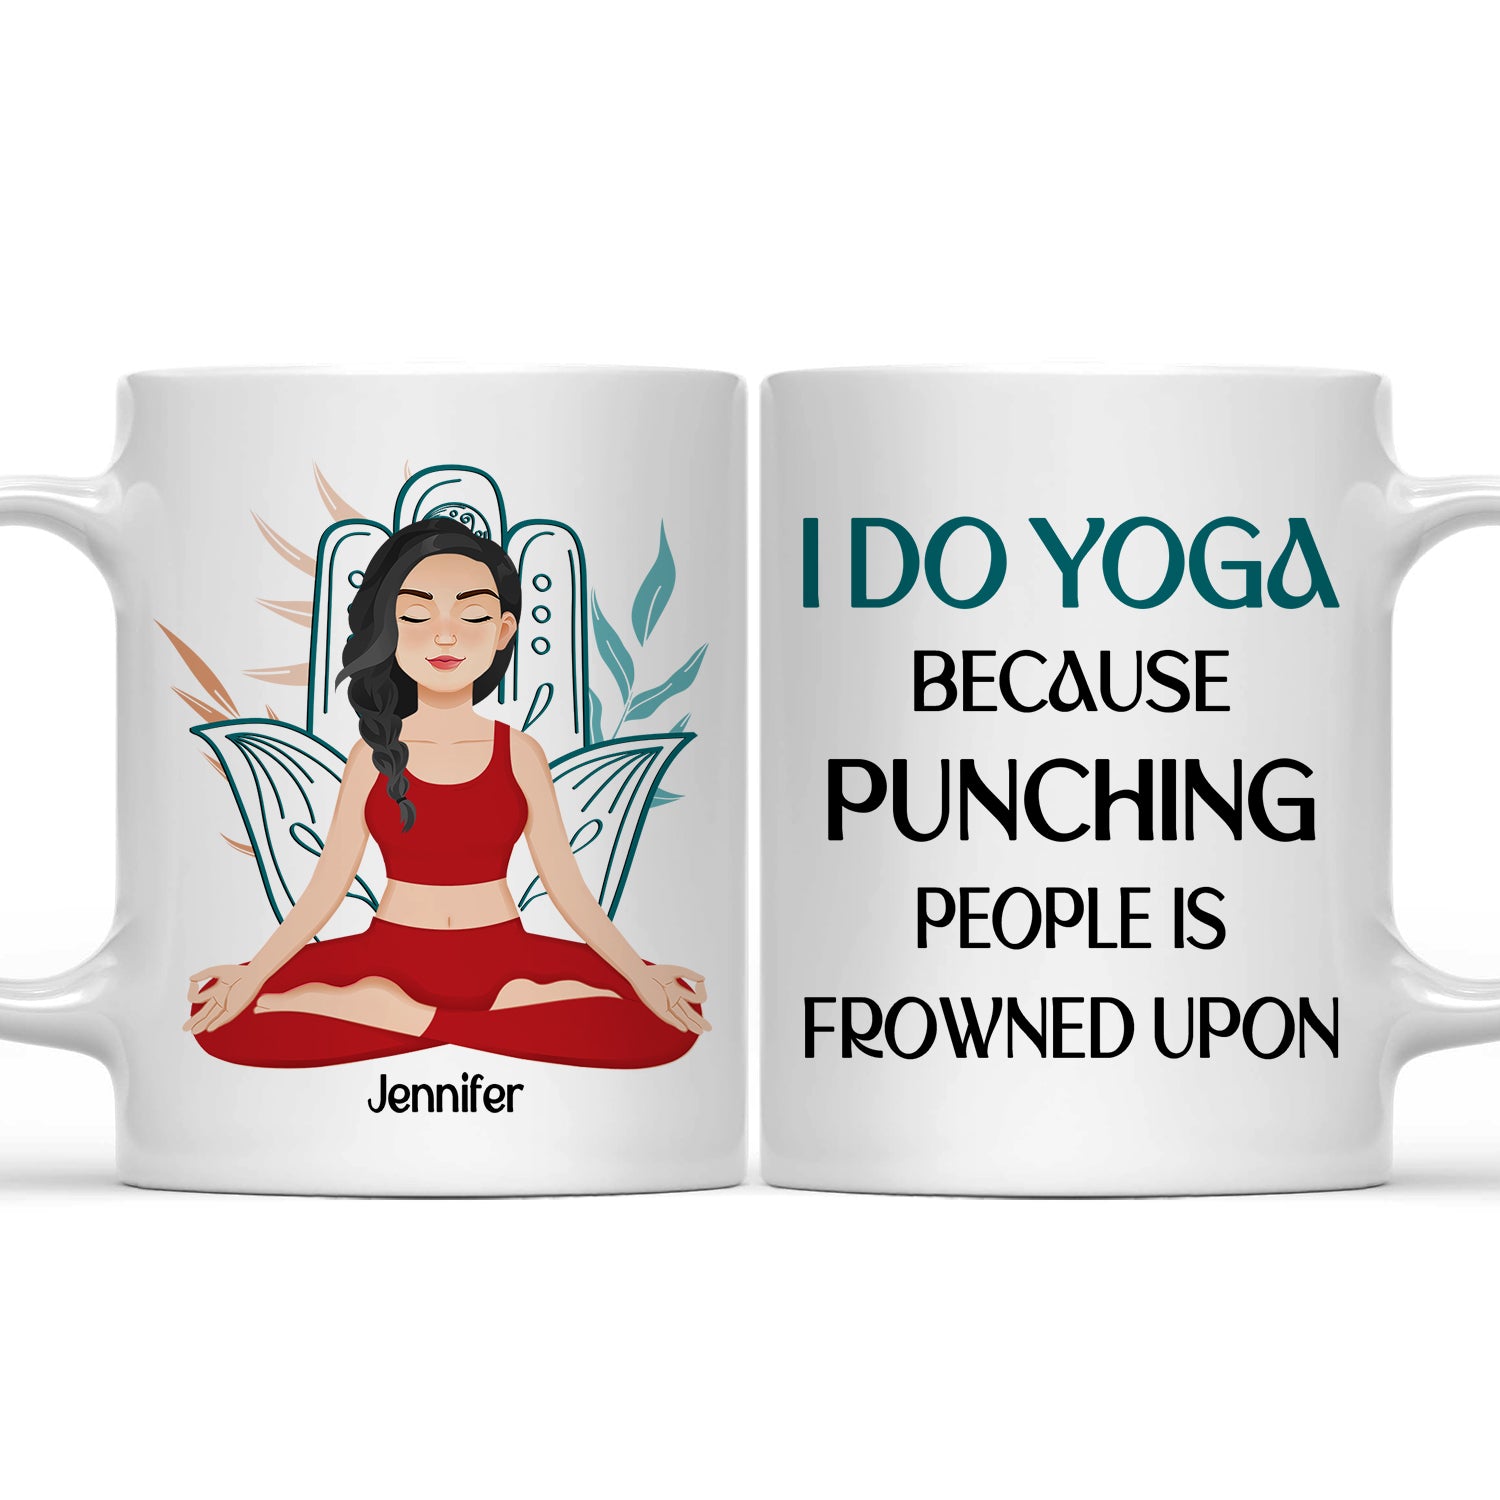 Punching People Is Frowned Upon - Gift For Yoga Lovers - Personalized Mug